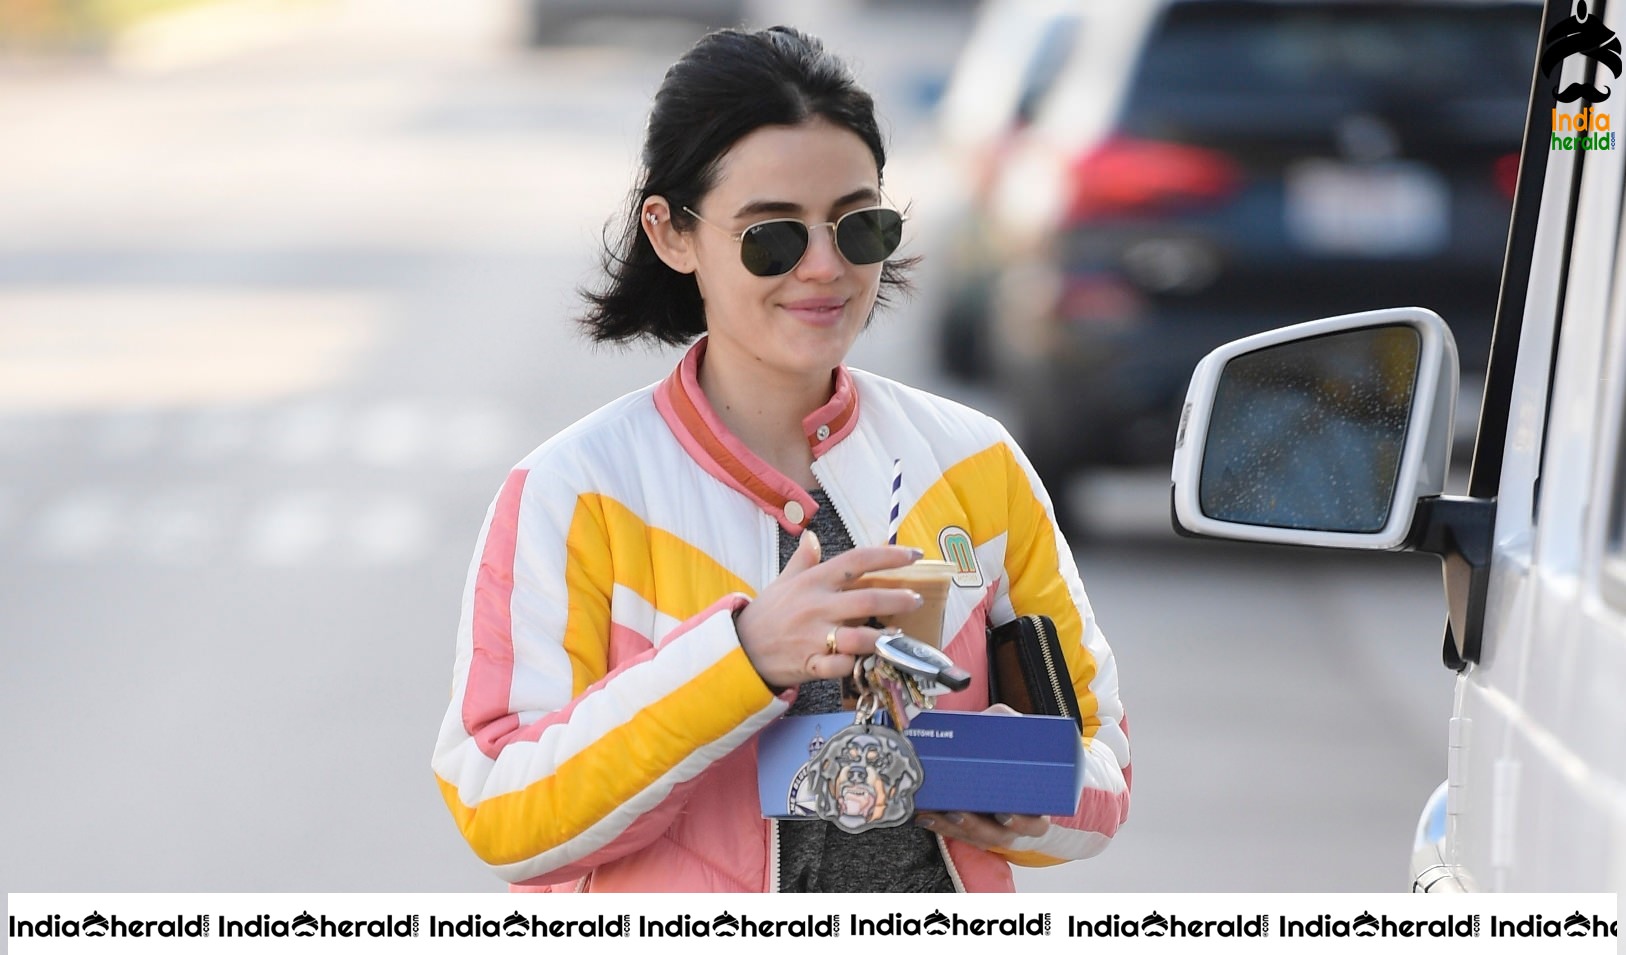 Lucy Hale Paparazzi Photos while making a morning Coffee run in Los Angeles